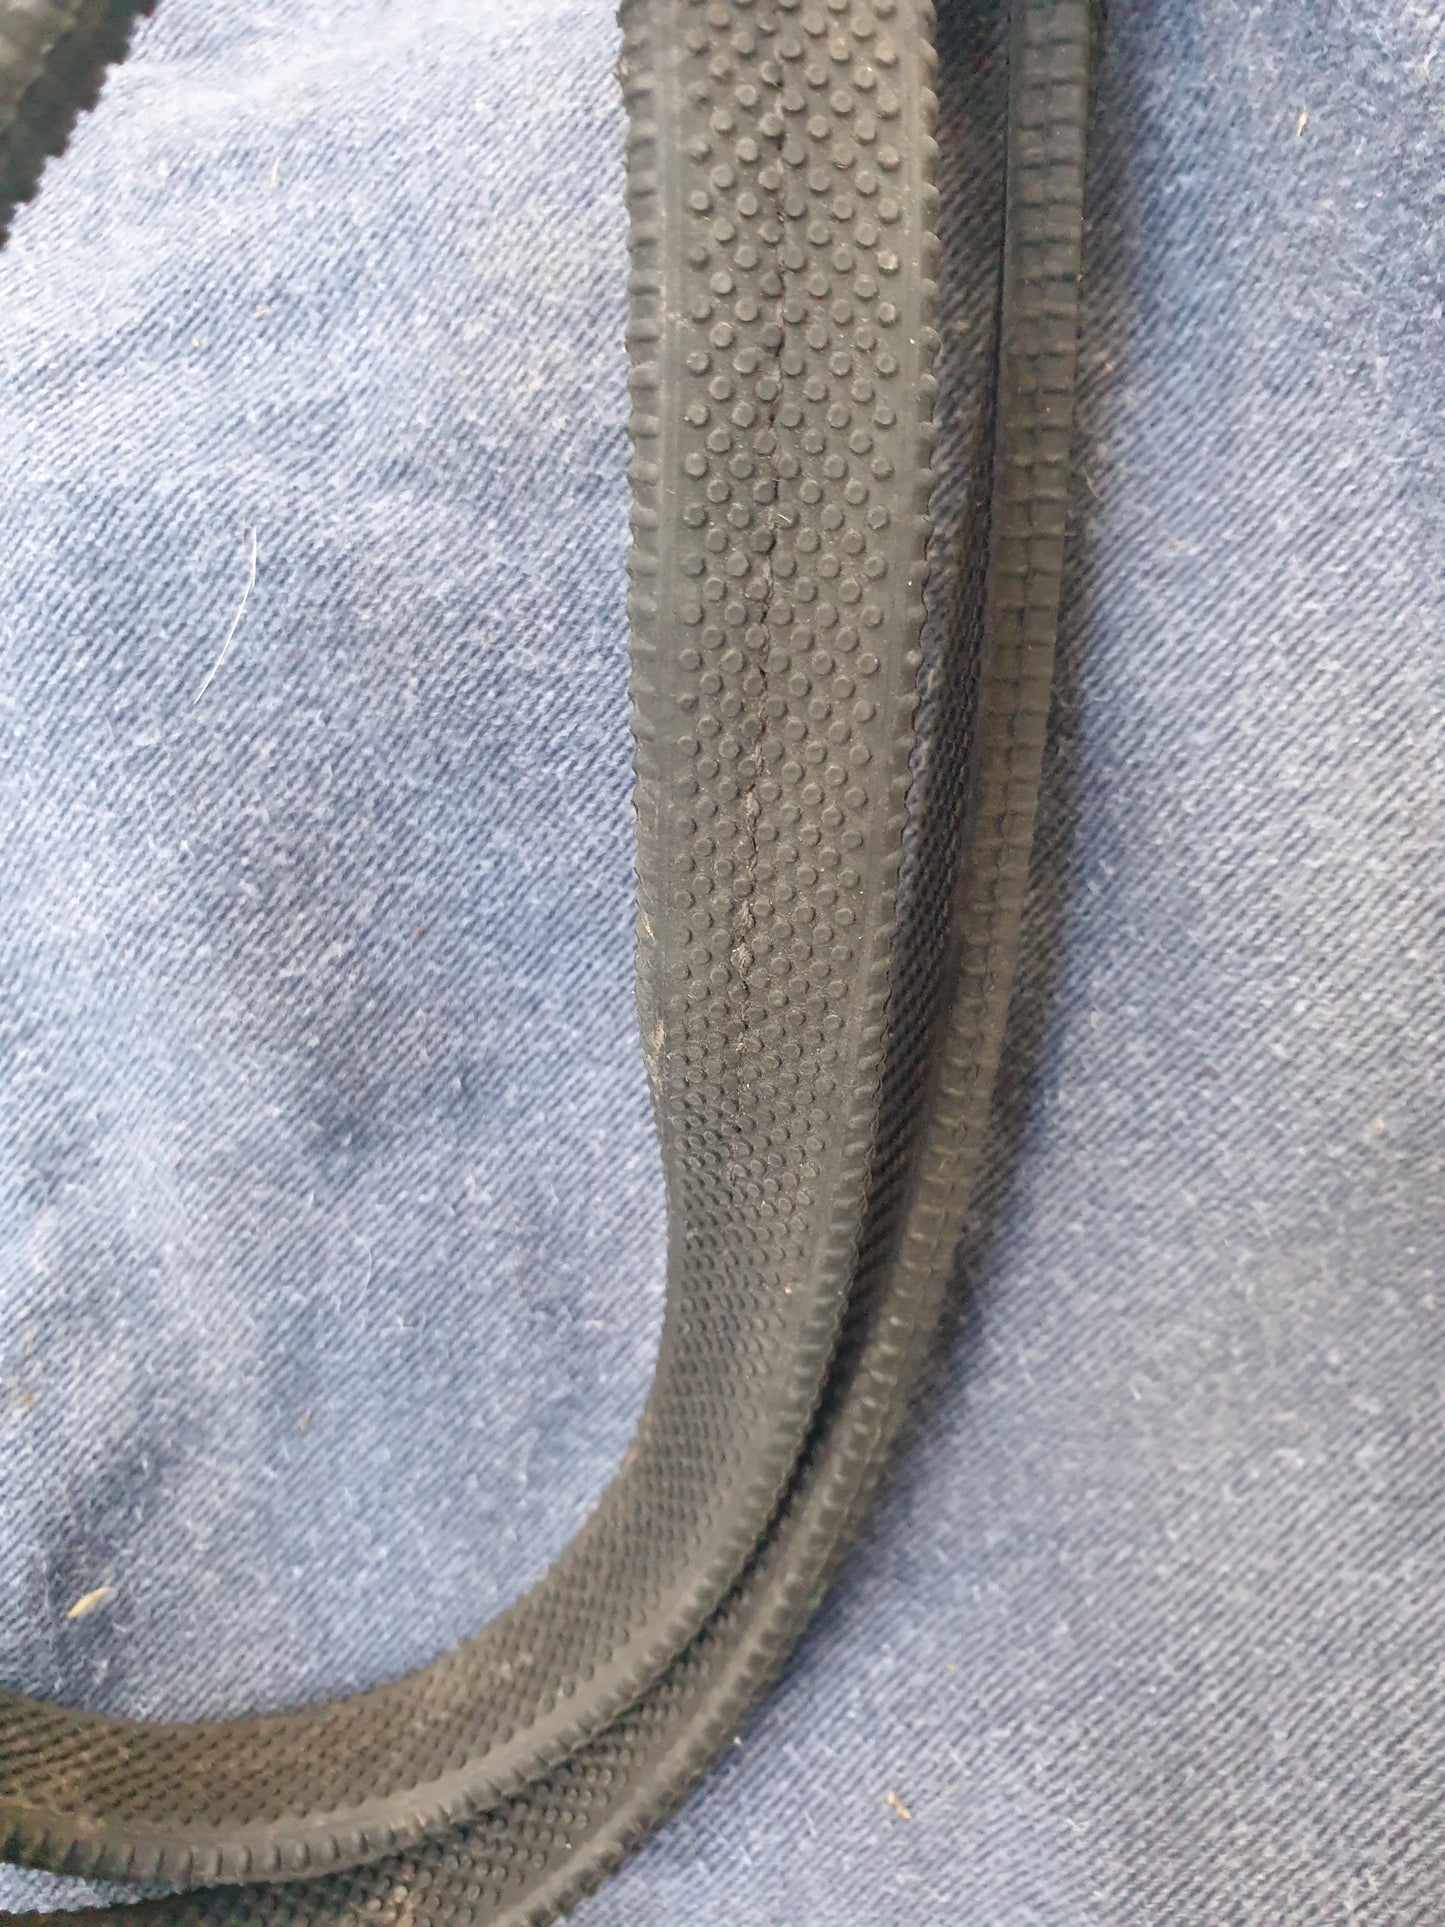 Used cob size black rubber reins FREE POSTAGE☆